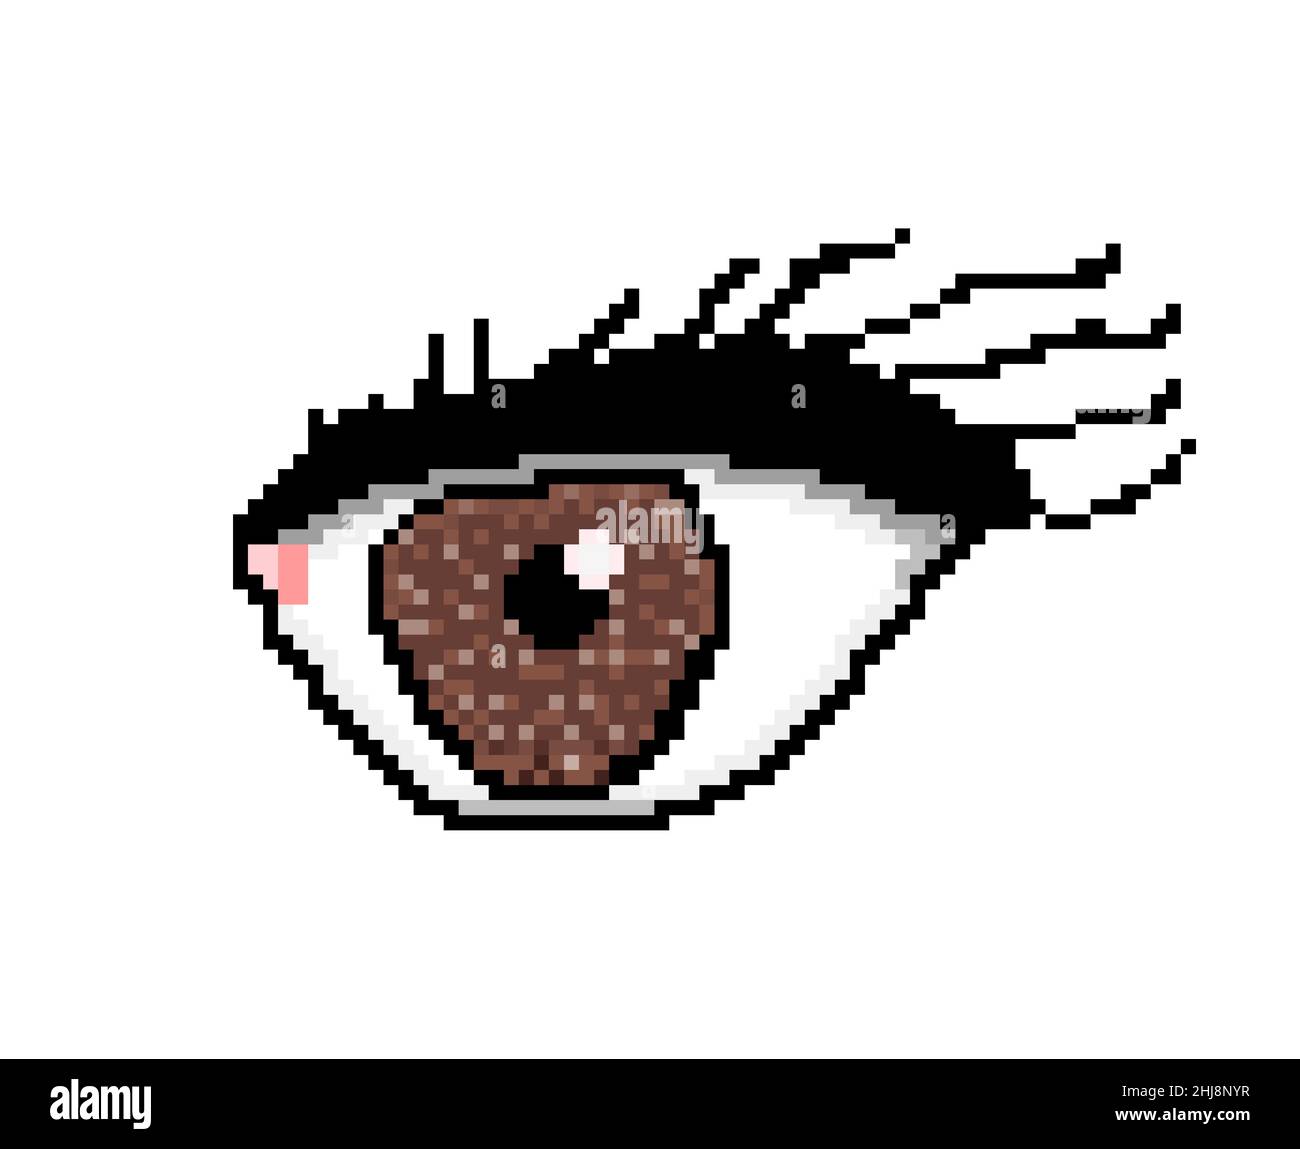 Pixel art: a big giant female eye, with eyelashes and make-up, brown pupil. Stock Photo